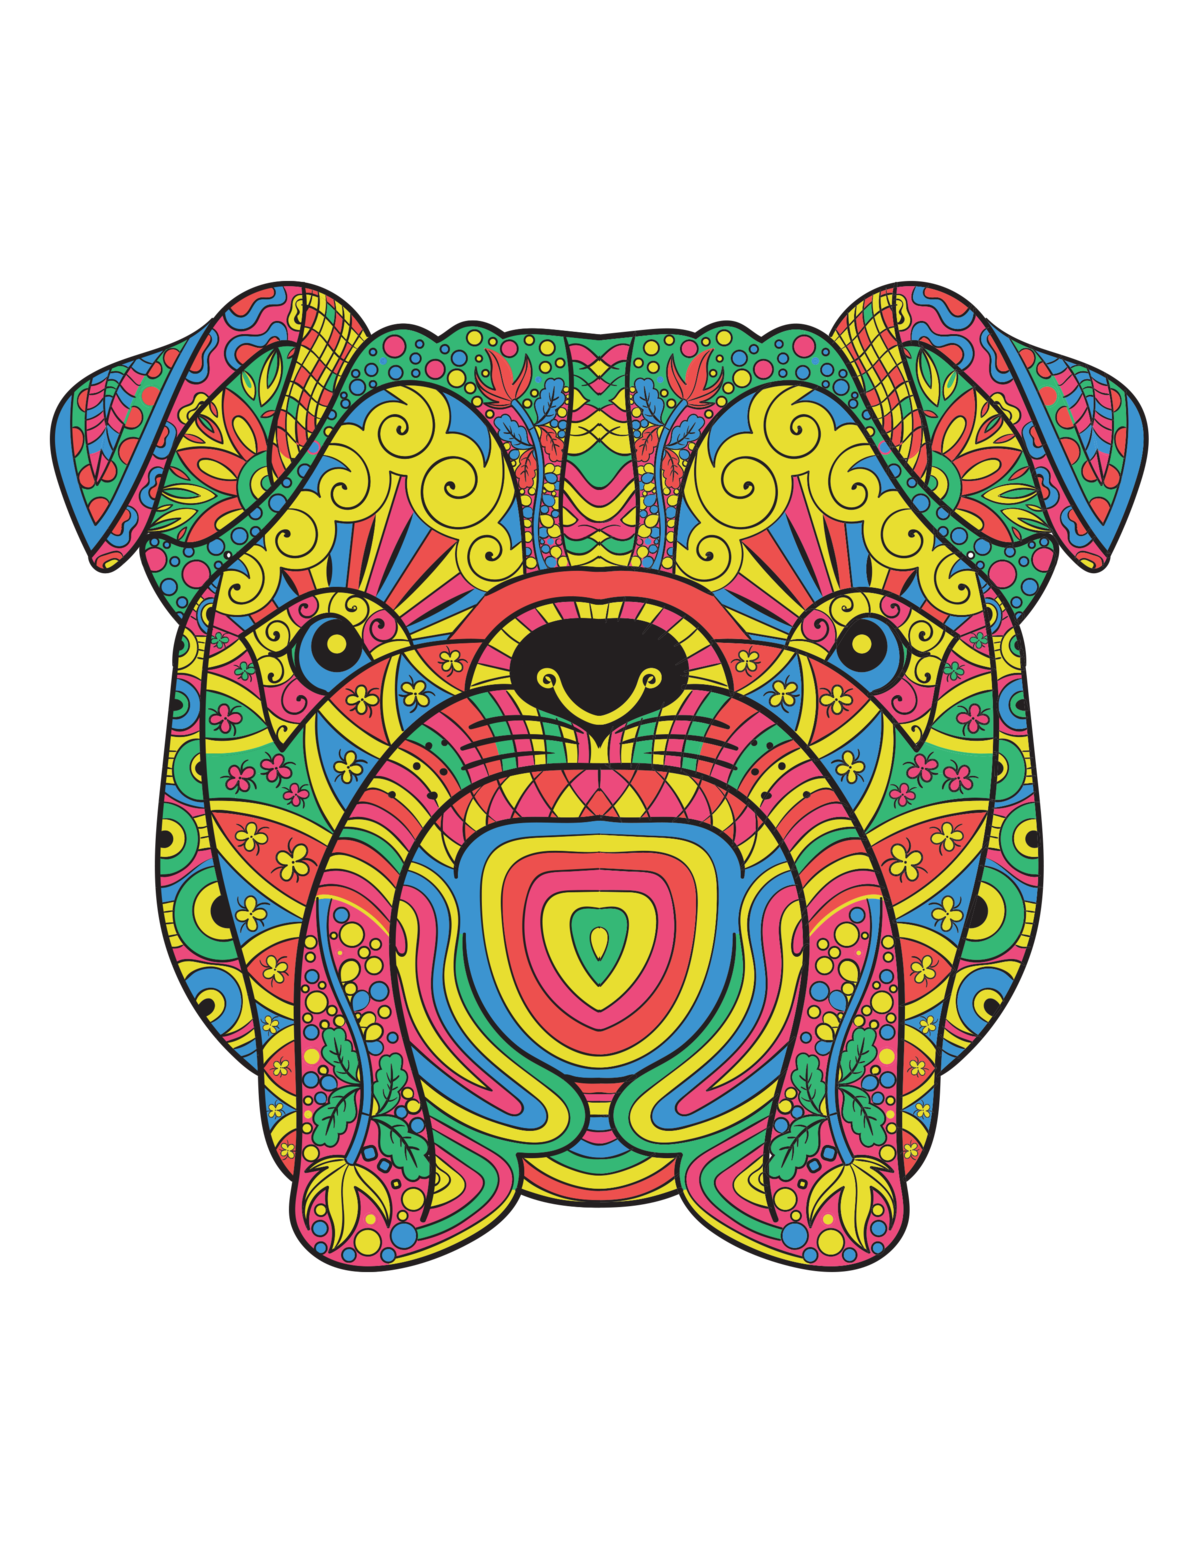 Adult Coloring Books - Animals, Geometric Shapes with Mandala Designs |  Creatively Calm Studios